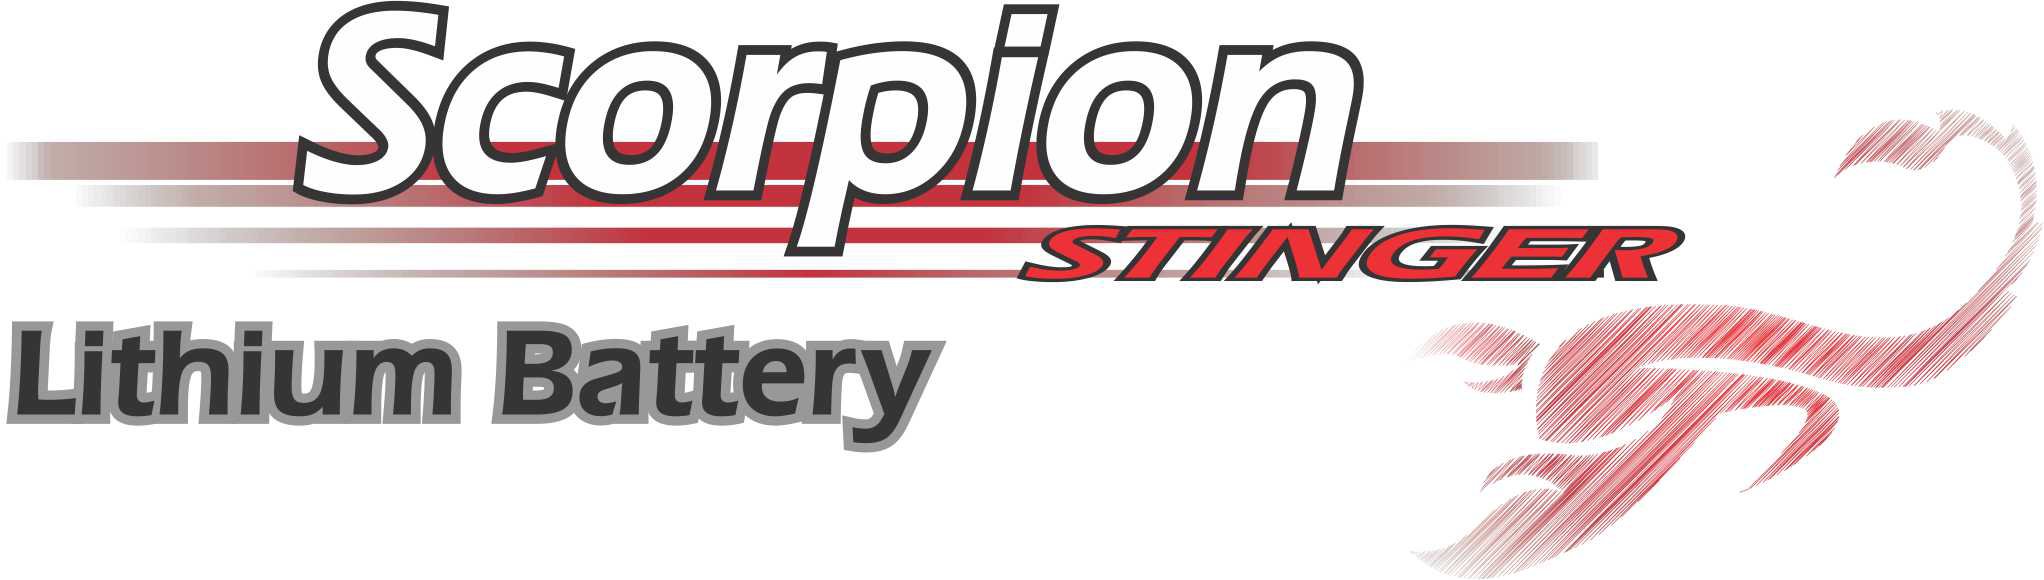 Picture of the Scorpion Stinger Logo. Red stipes behind the white Scorpion text. Stinger in smaller red text below the Scorpion word. Red scorpion to the lower right and Lithium Battery to left.